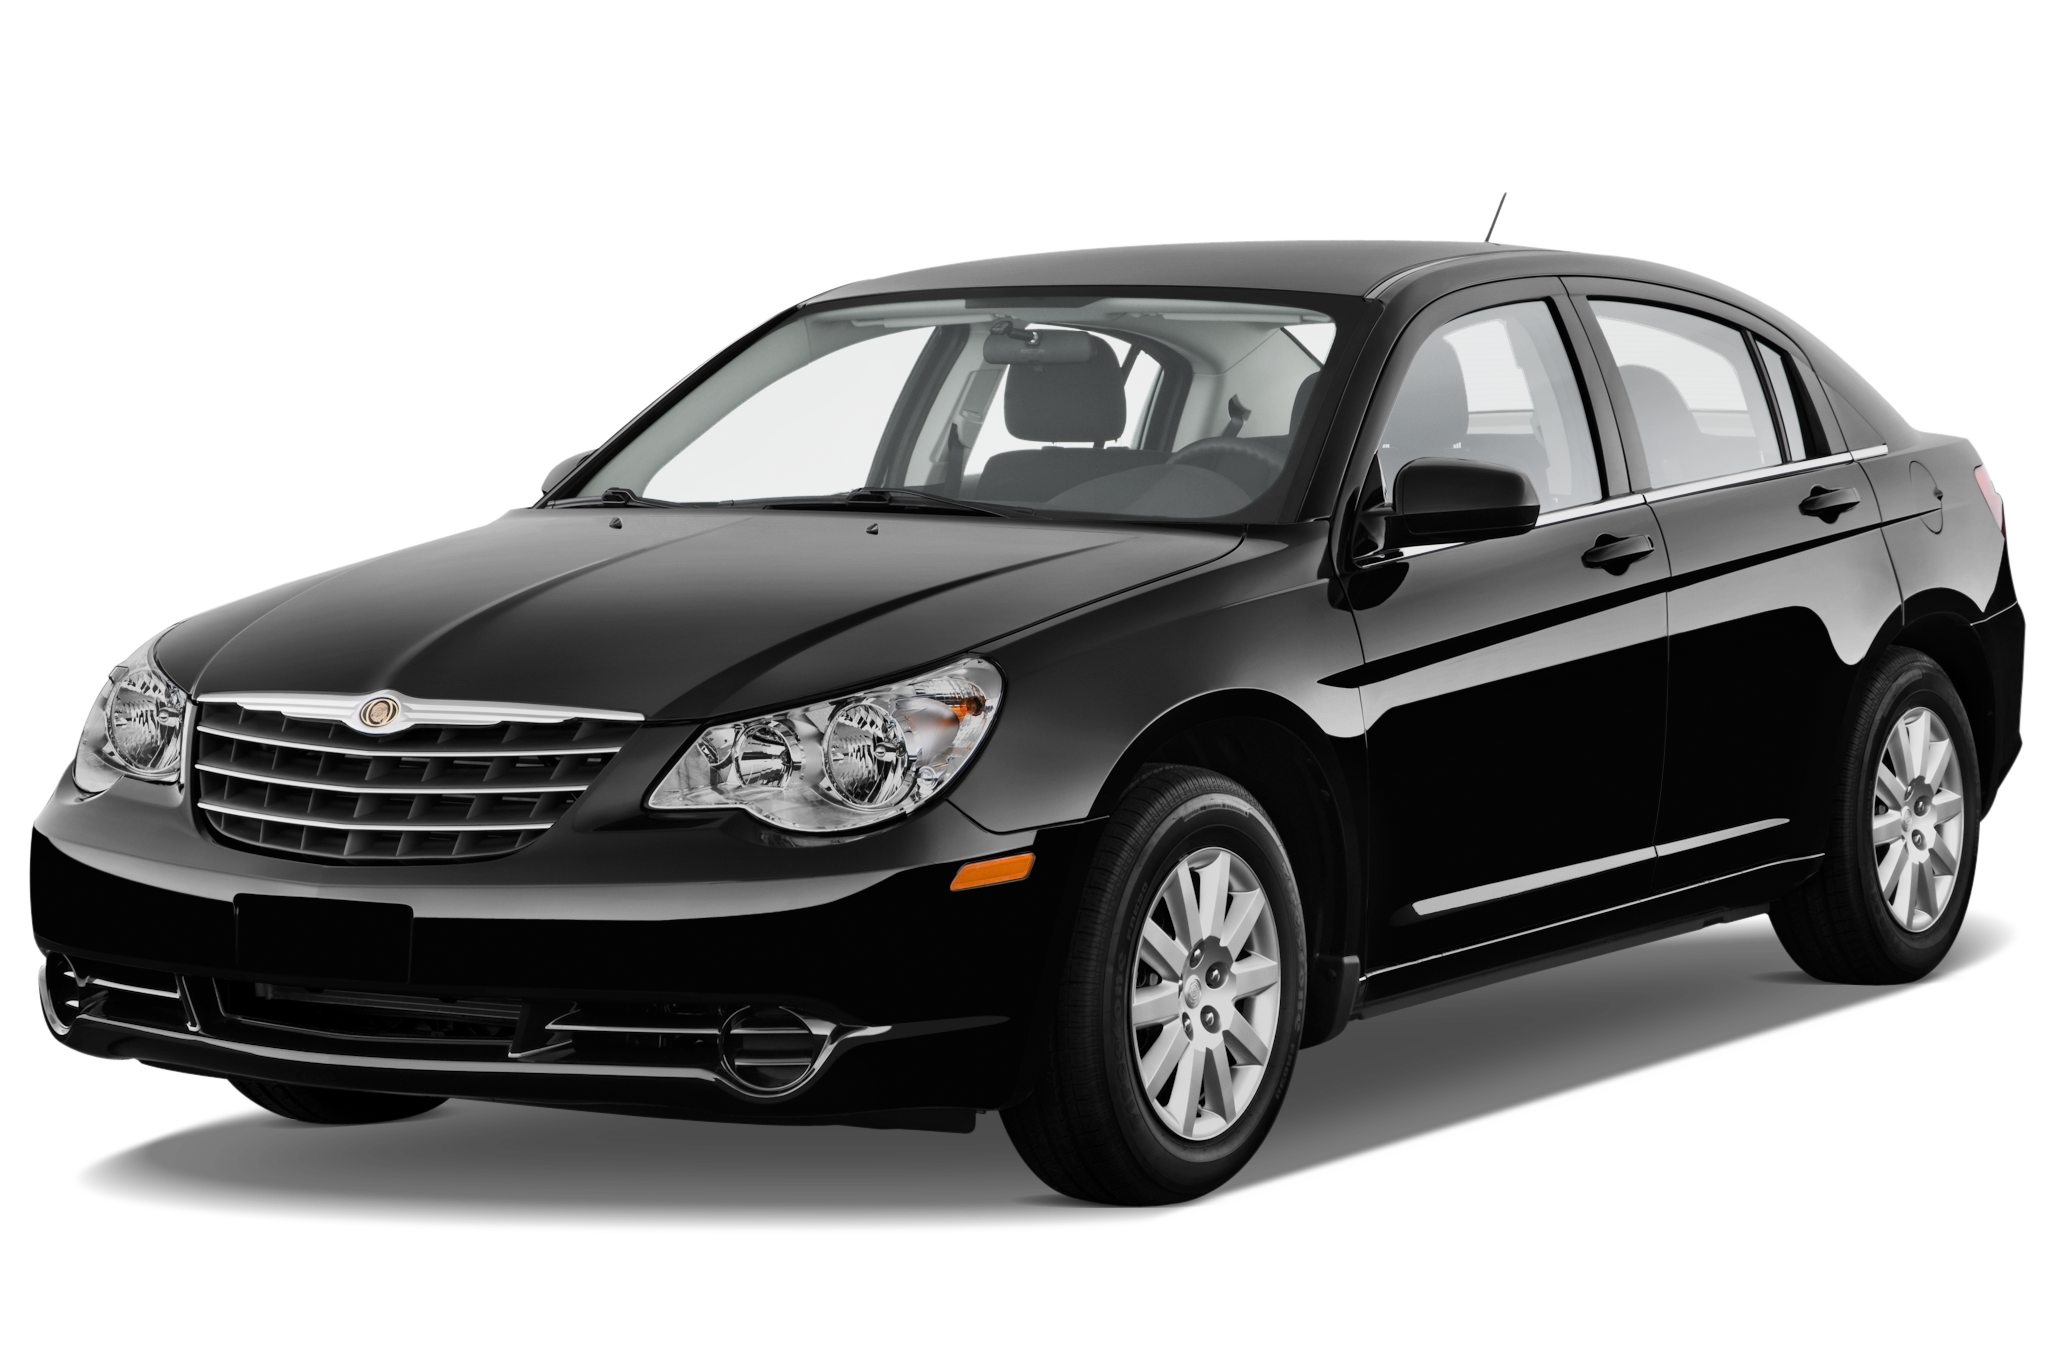 2010 Chrysler Sebring Pictures, Prices and Reviews - Driverbase